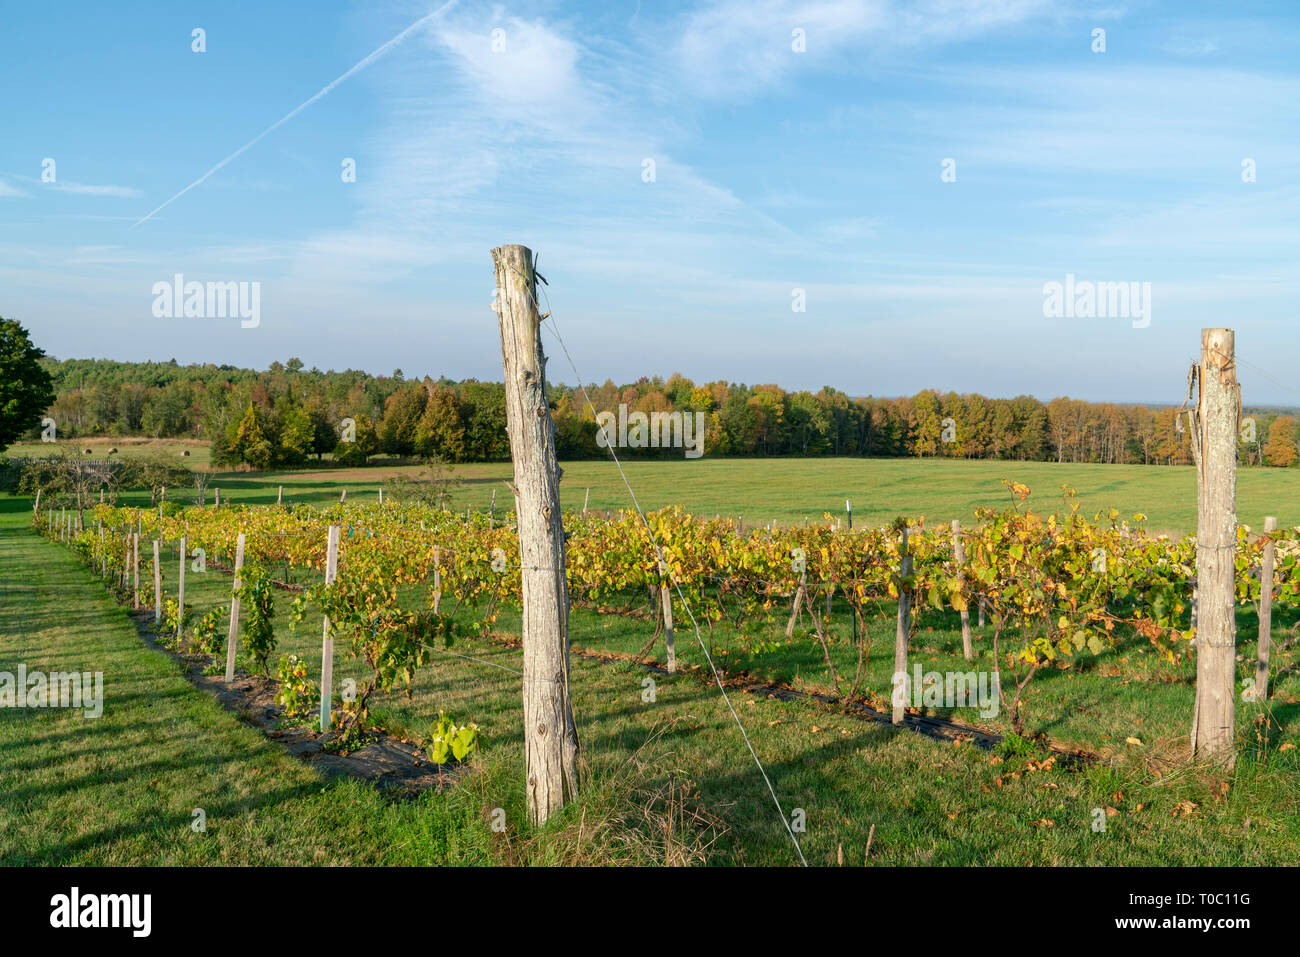 Winery with its own vineyards in the Maine countryside. There are red and green grapes ready to be harvested. Stock Photo